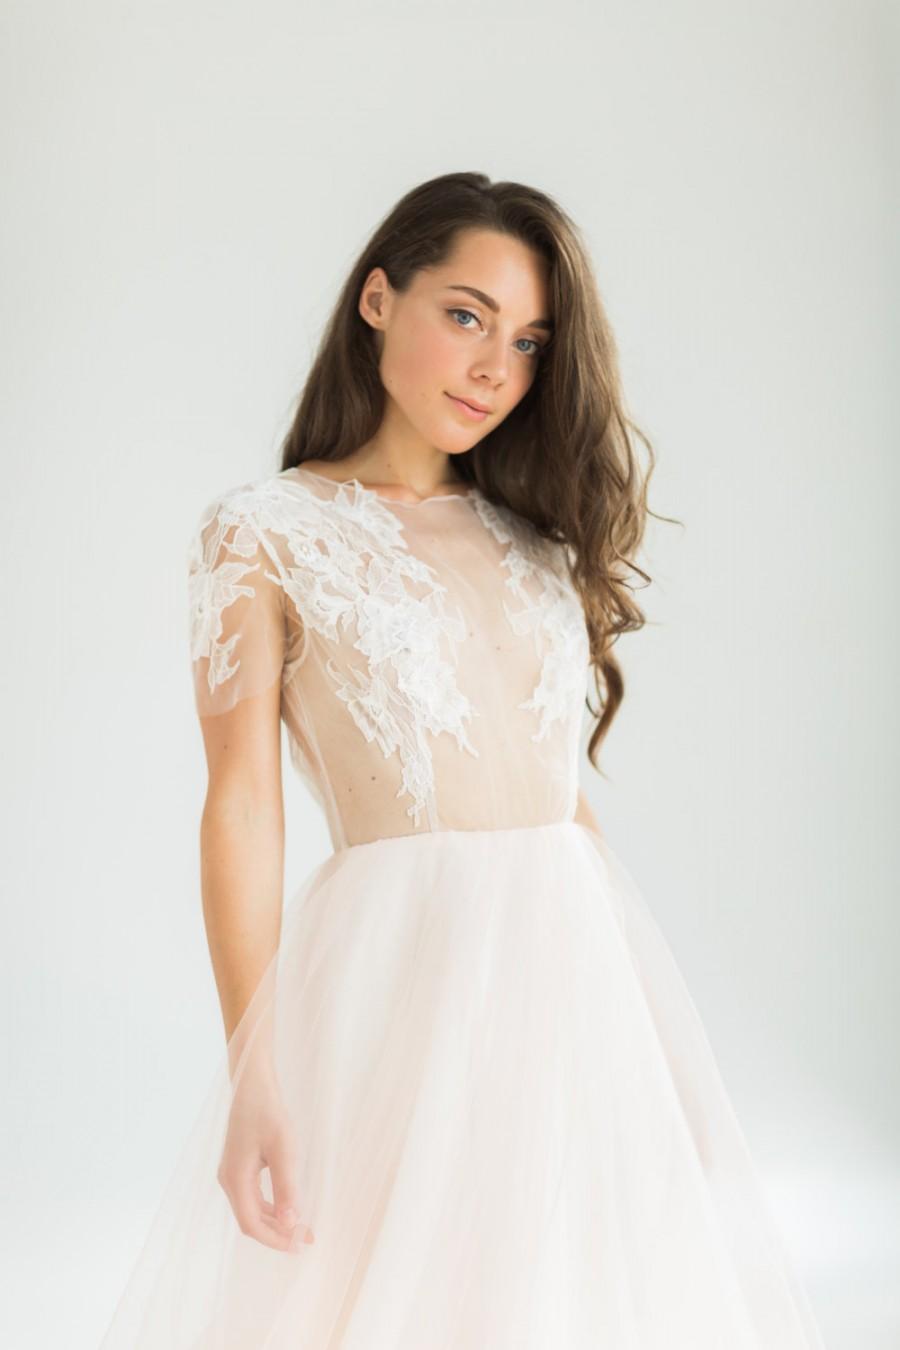 Wedding - Romantic ball gown peach wedding dress with sheer bodice with handmade lace decoration // Persica wedding dress